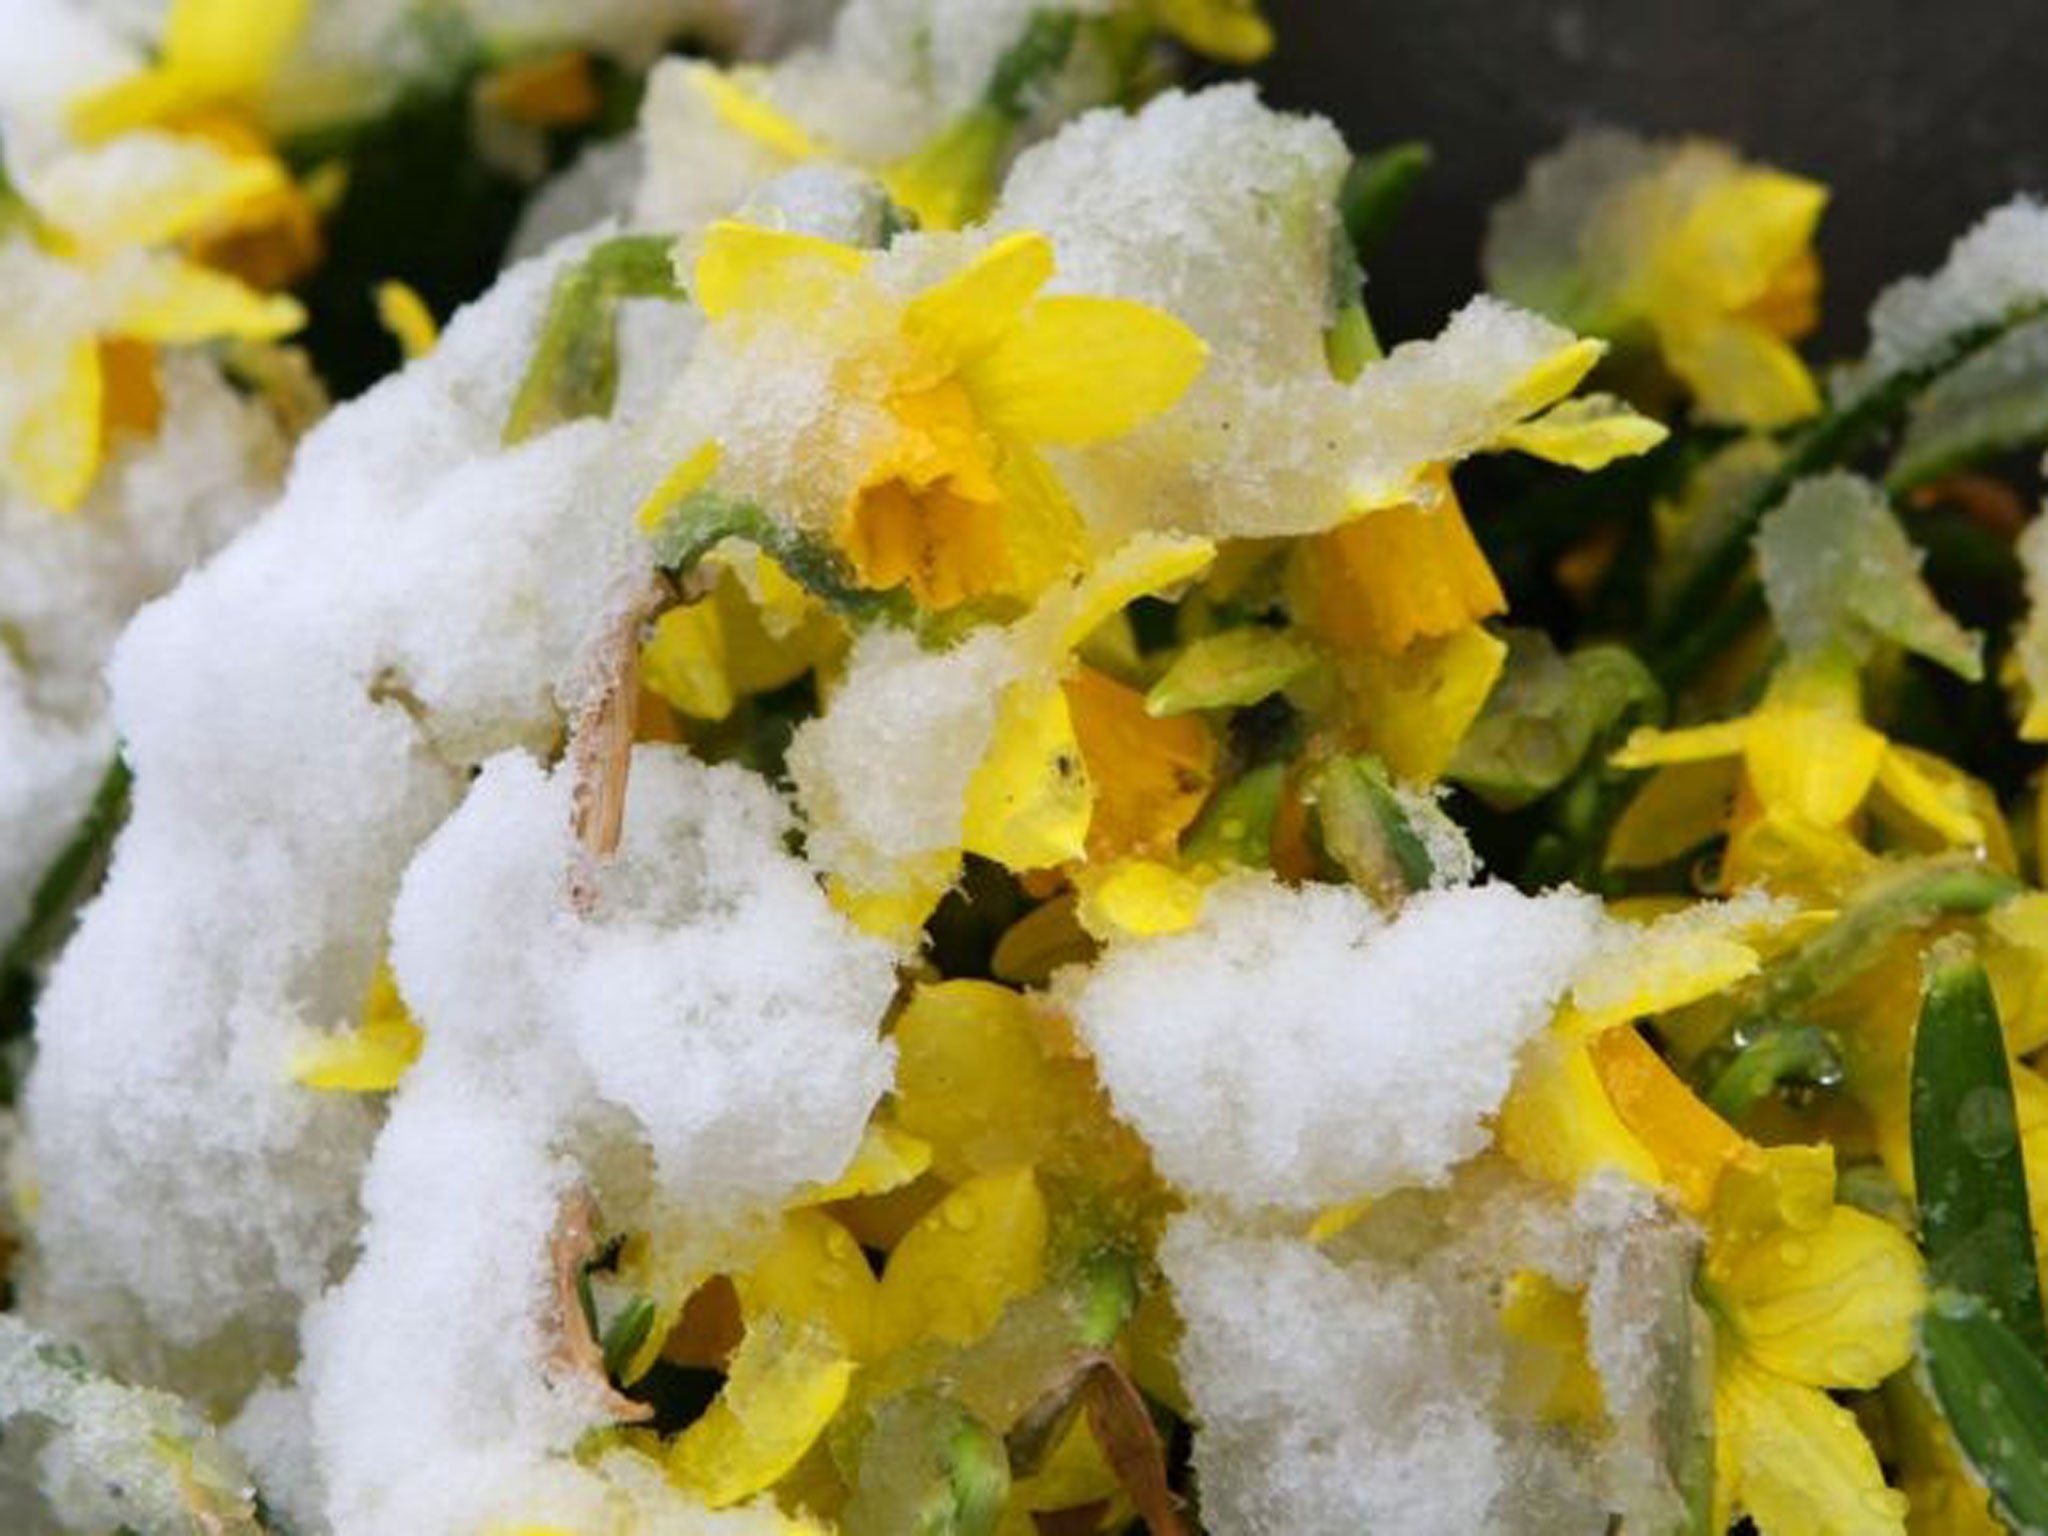 Daffodils could be blooming in the snow